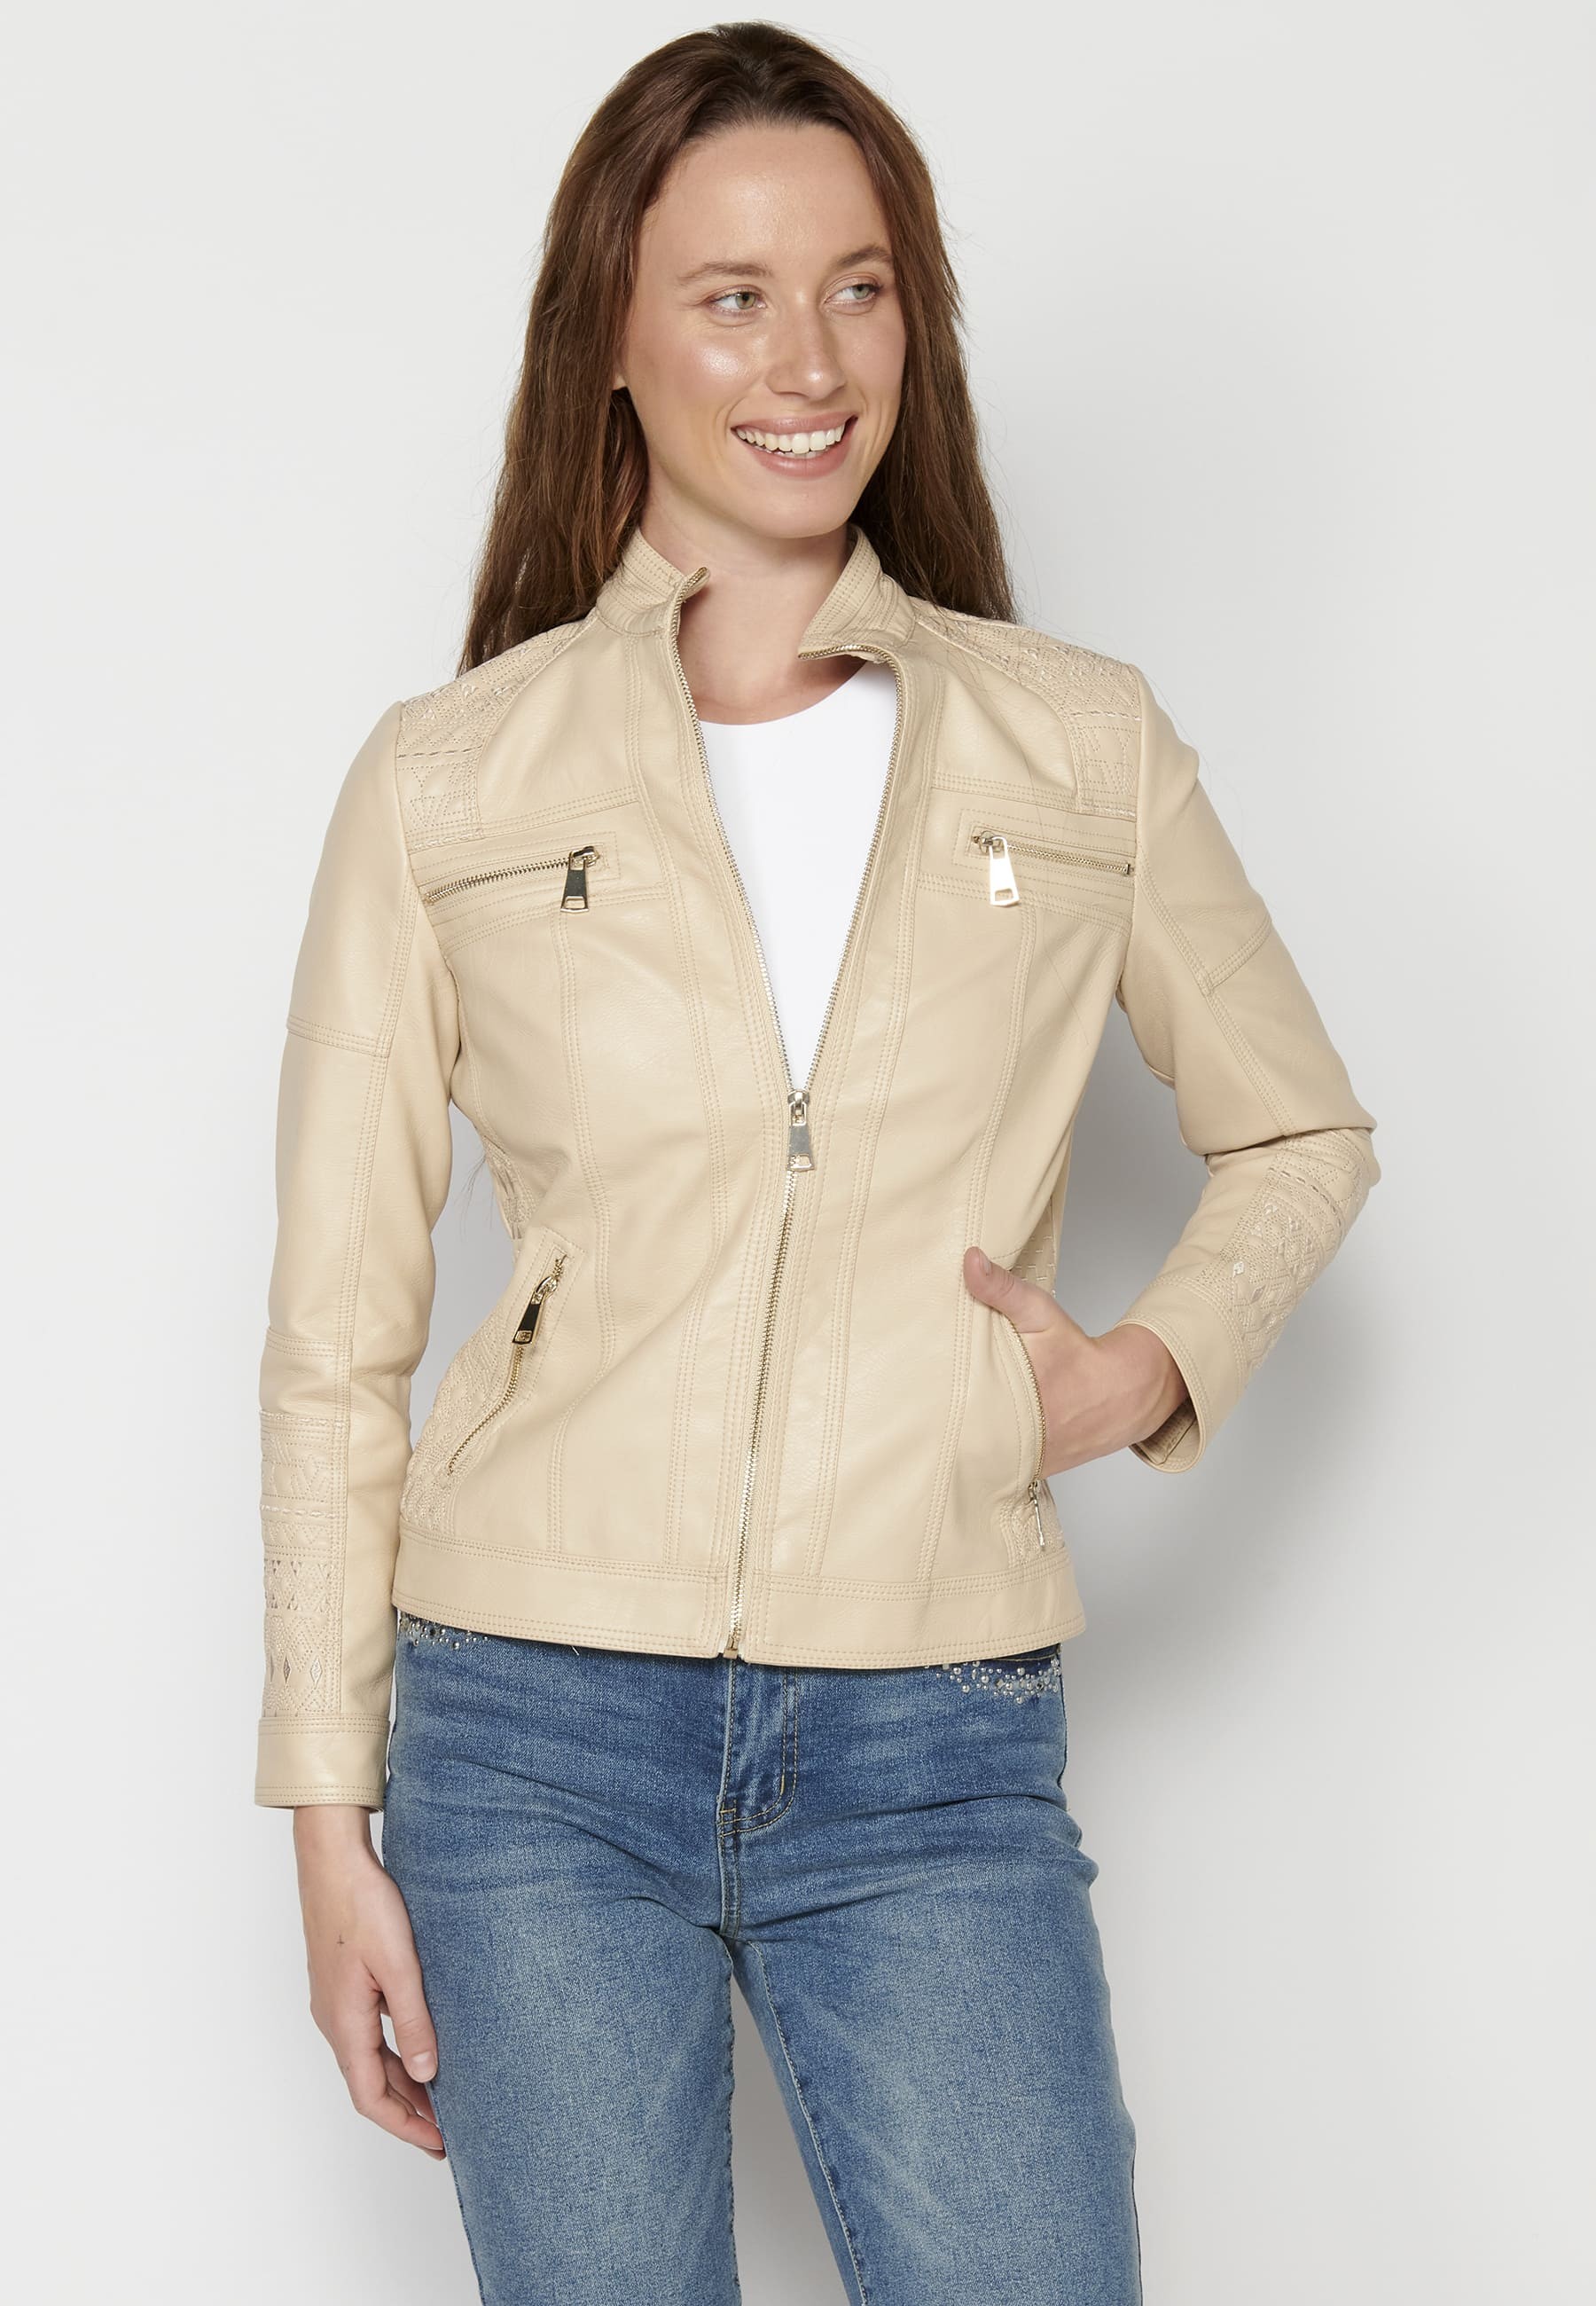 Synthetic leather jacket with details on shoulders Ecru color for Woman